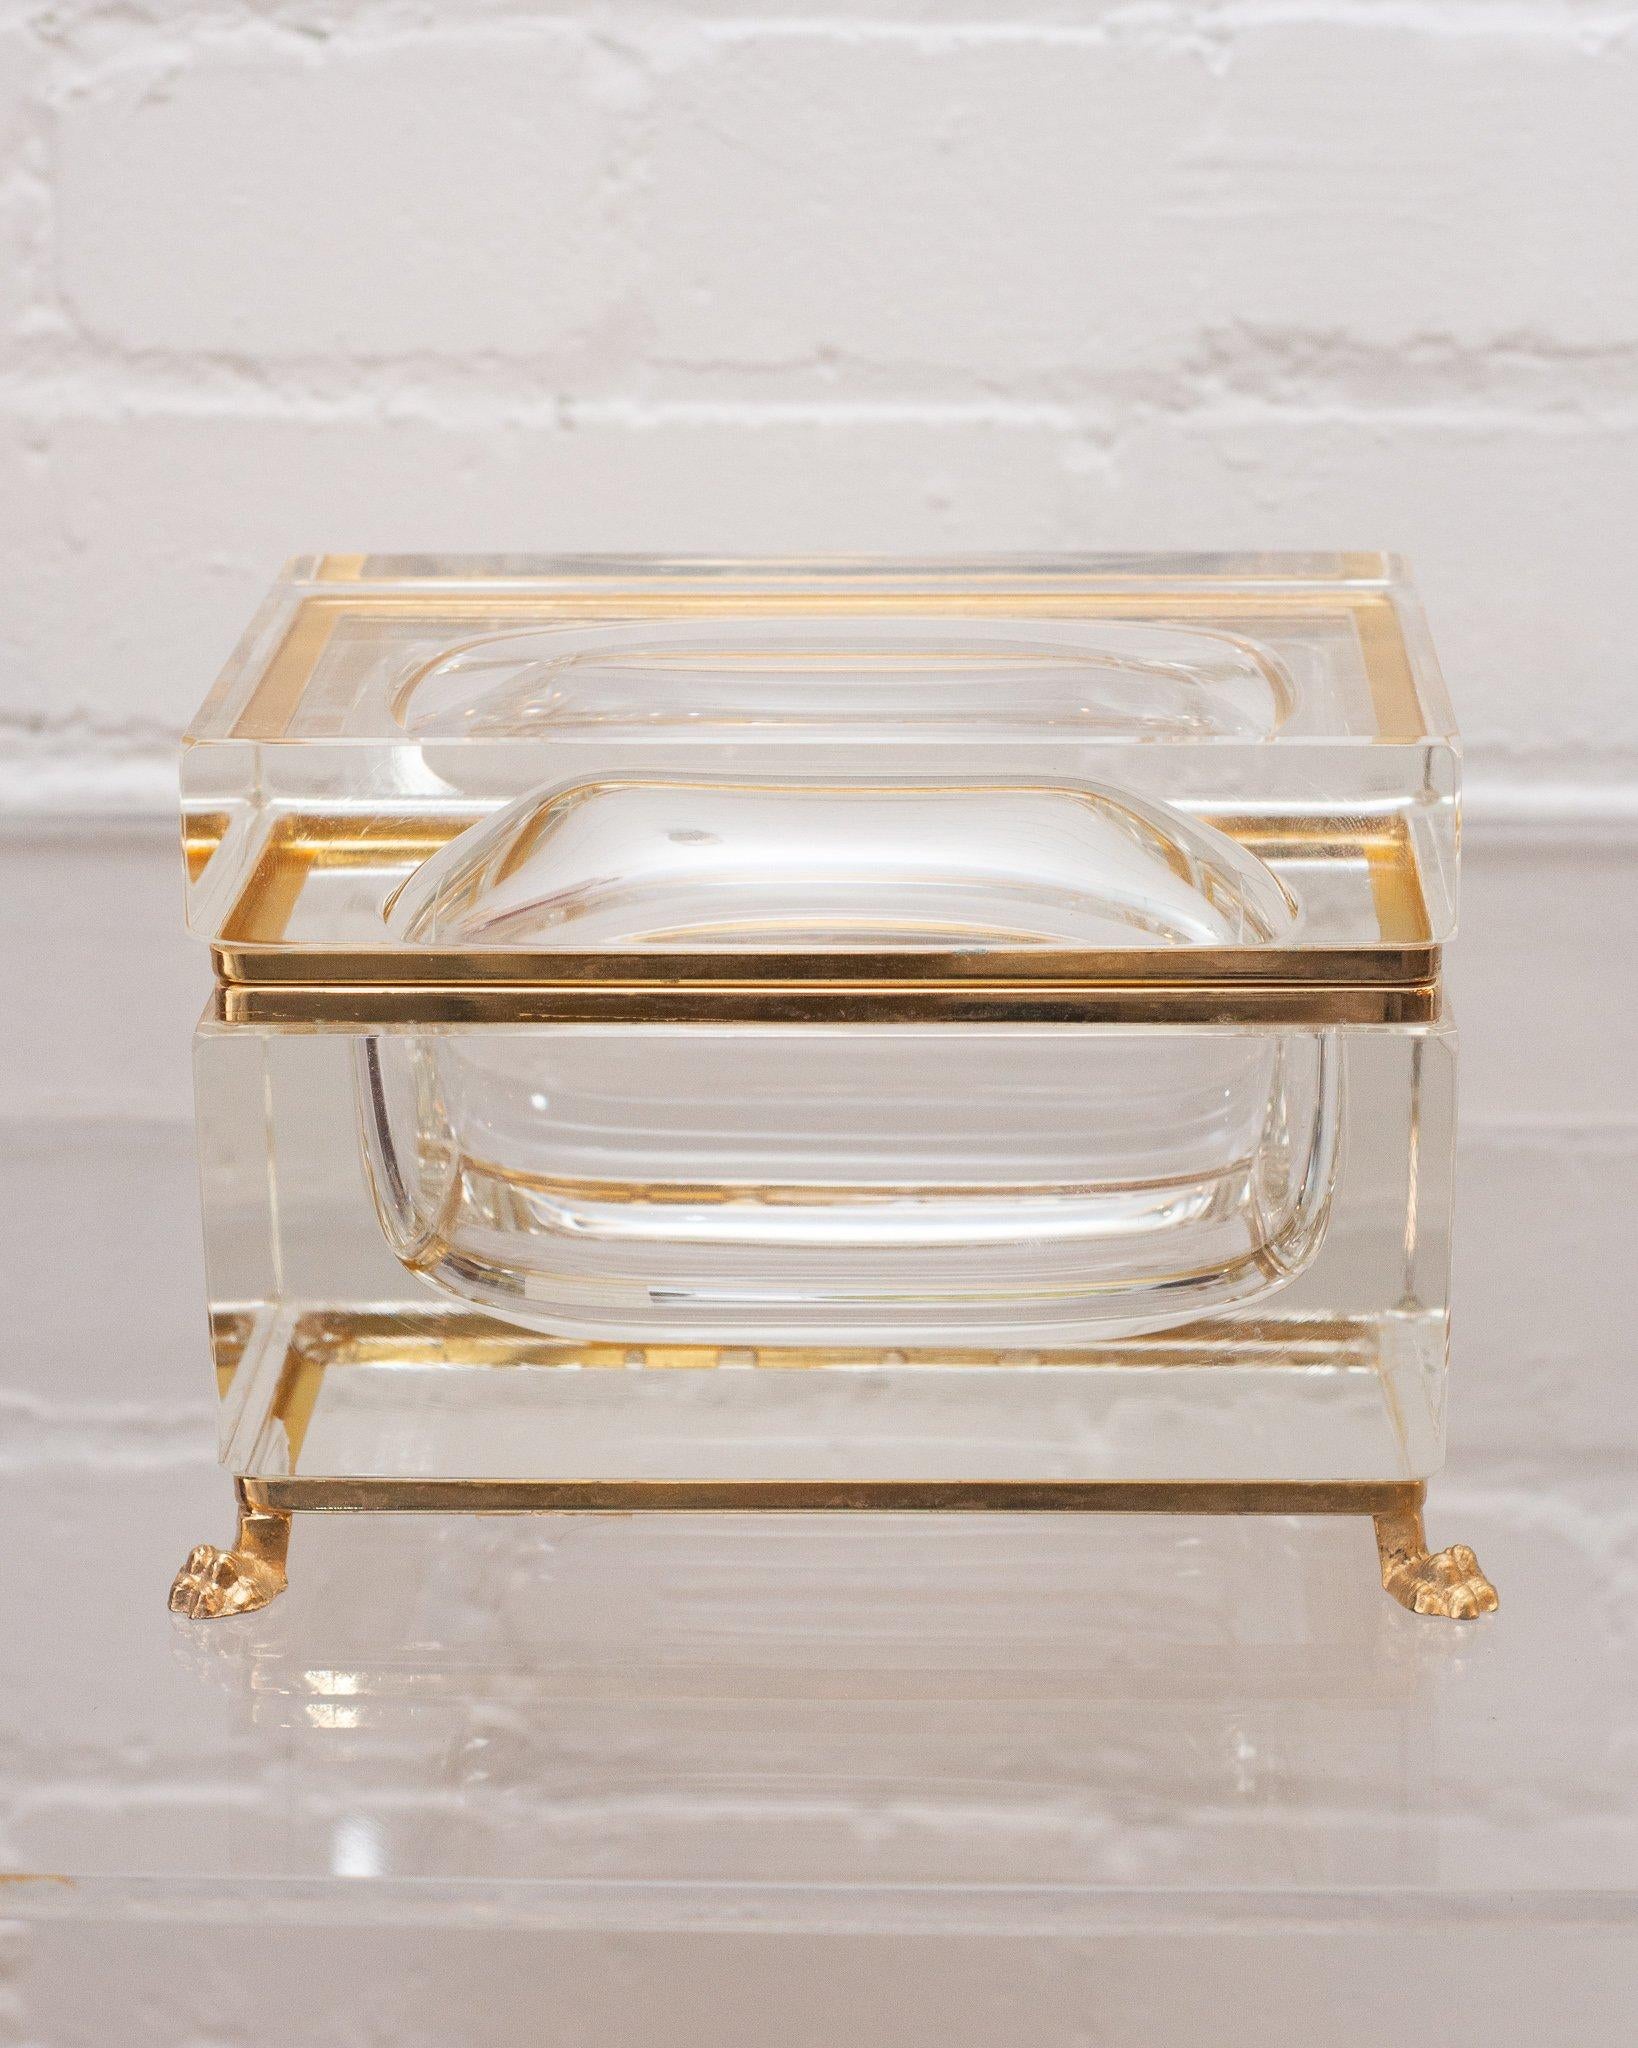 This antique large crystal and bronze box makes a statement in any space. A very contemporary design for the early 1900s production, this piece transitions from modern to Classic interiors seamlessly with its sophisticated lines.